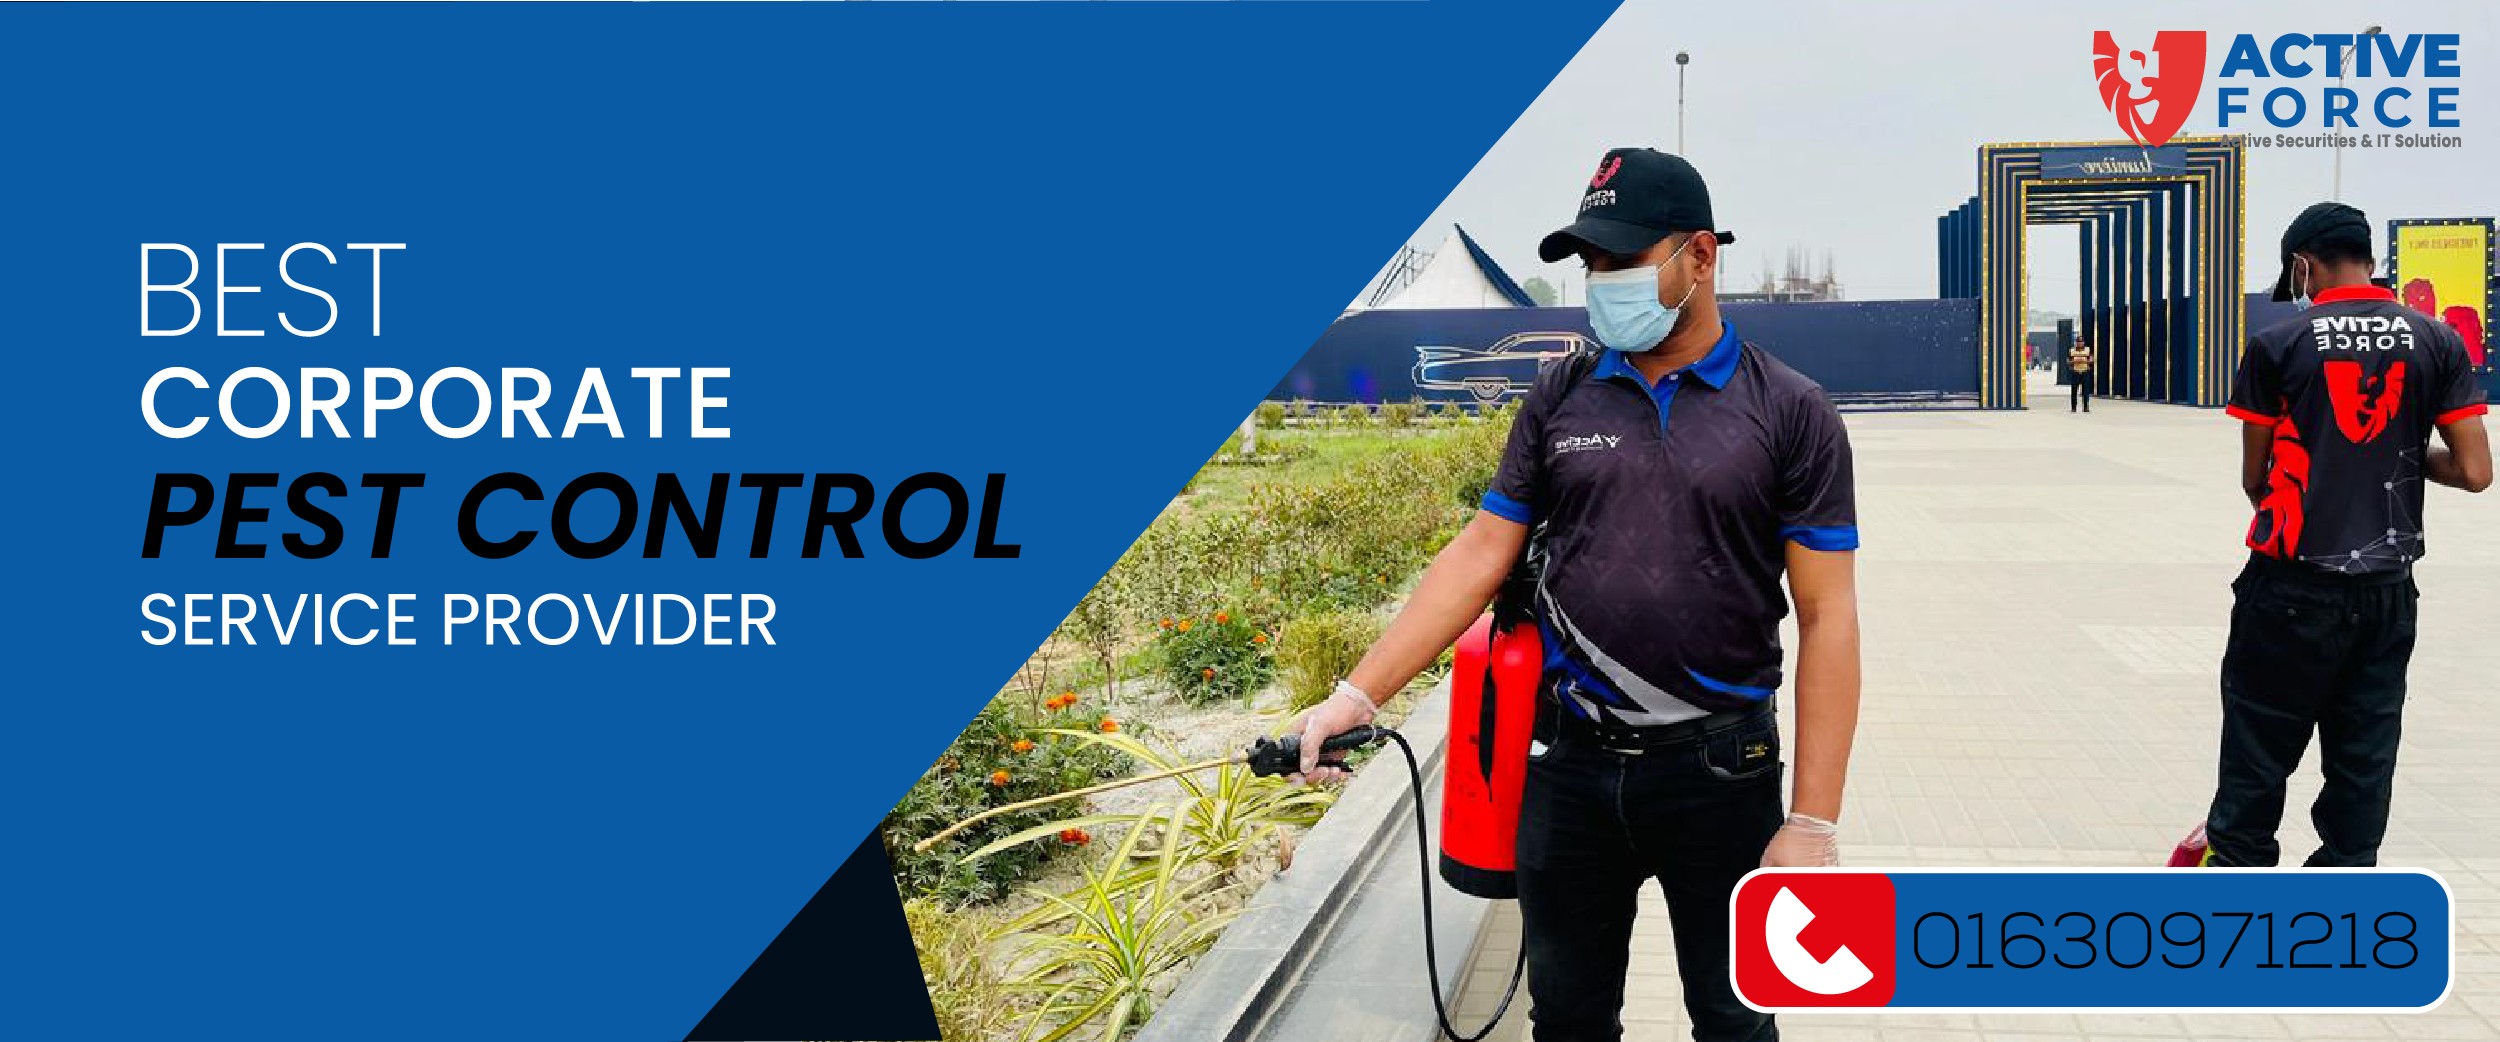 best corporate pest control service provider in Dhaka | Active Force